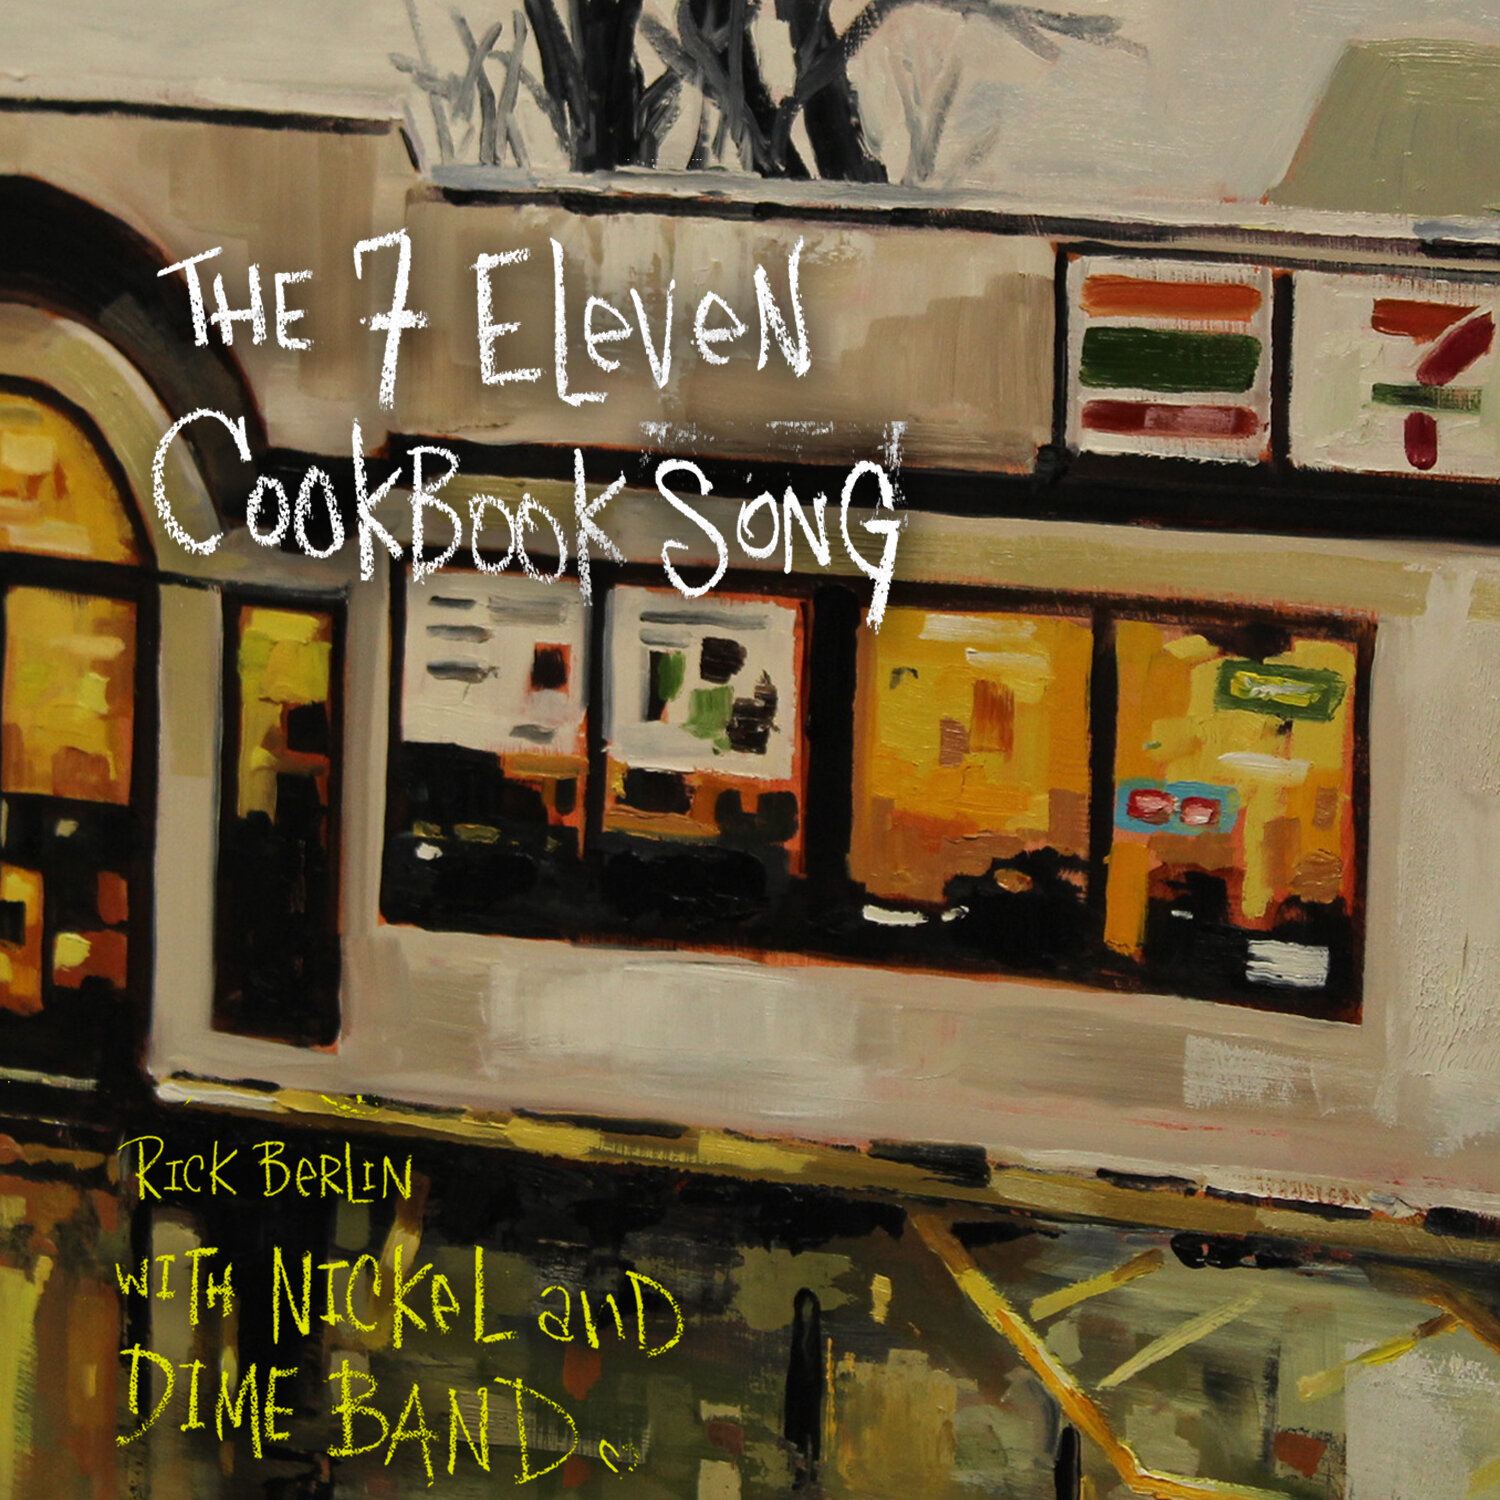 THE 7 ELEVEN COOKBOOK SONG